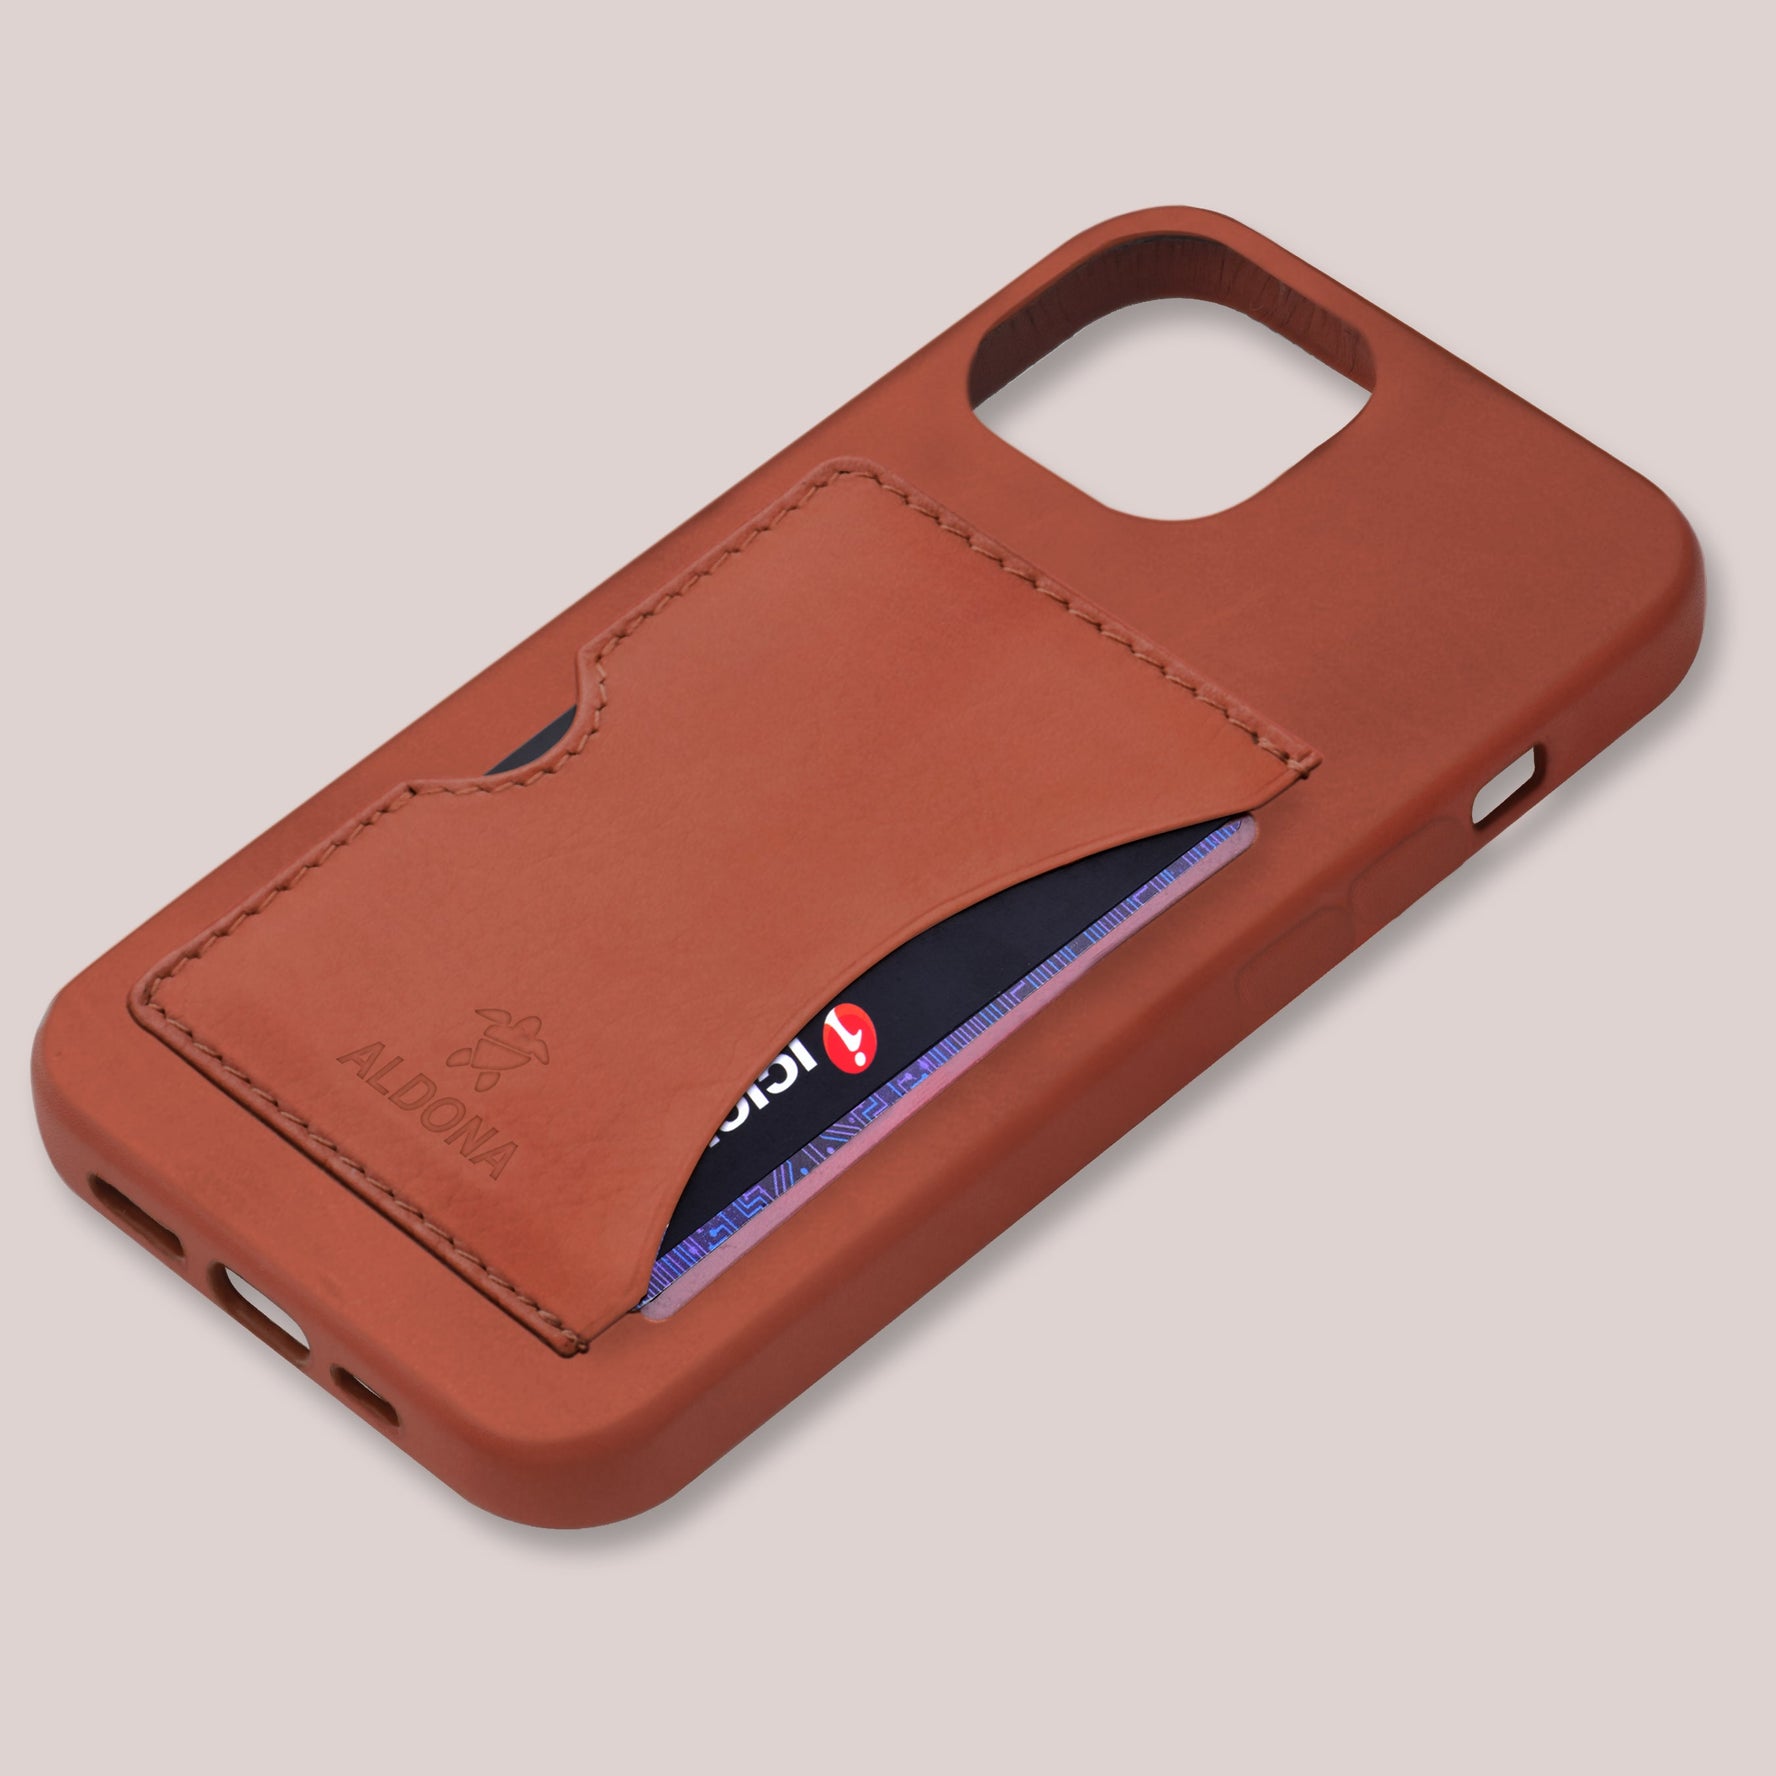 Baxter Card Case for iPhone 12 Series - Cognac